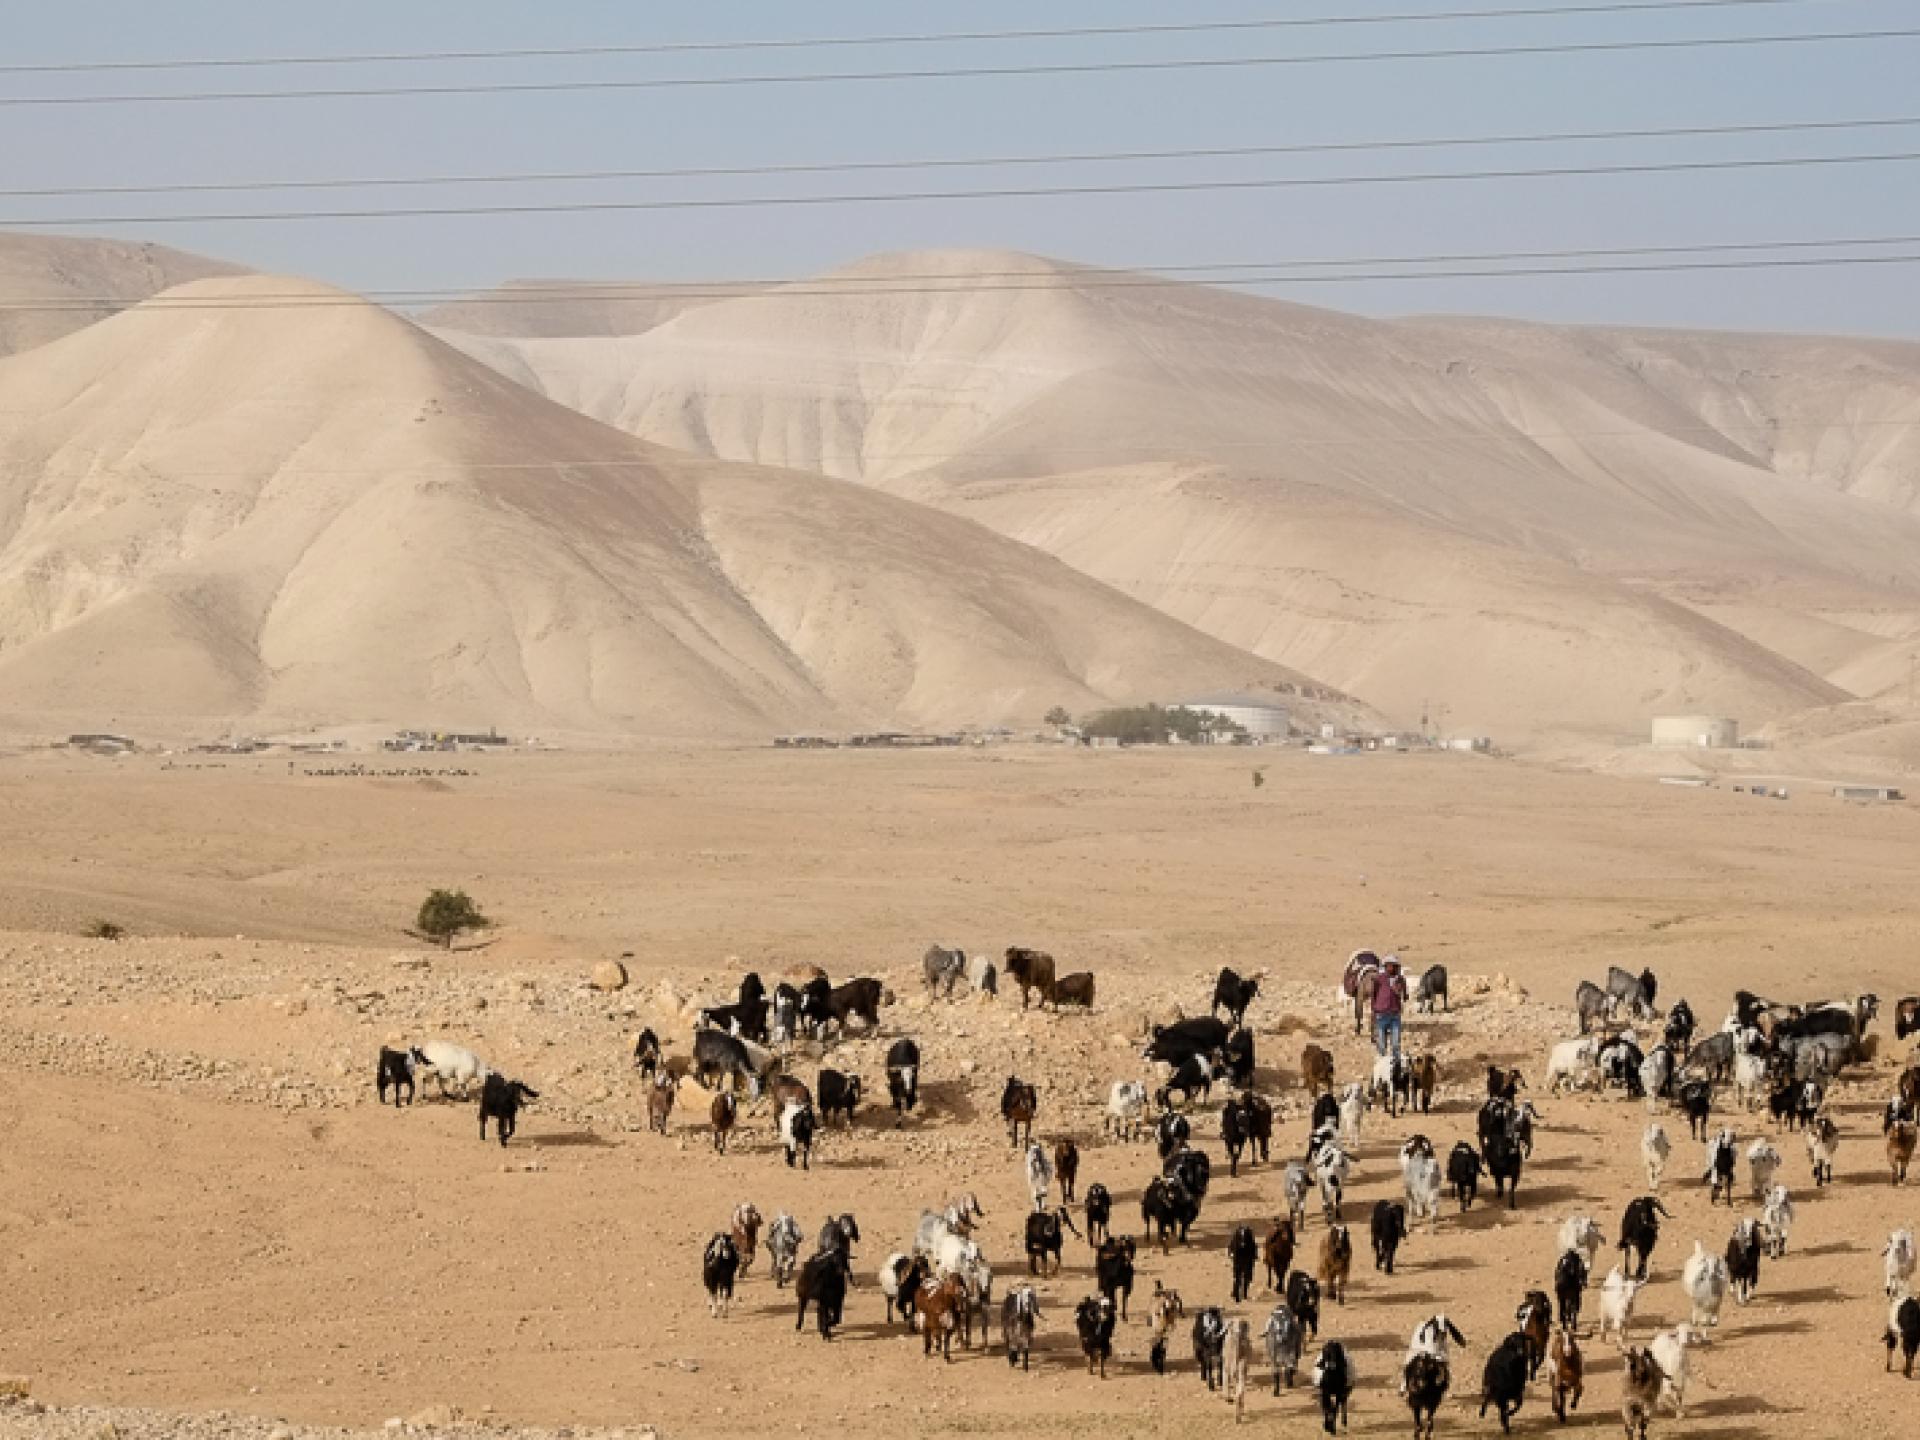 Jordan Valley south: the herds are arriving from a bare desert area – where there is no dispute with the settlers, as there is nothing to graze